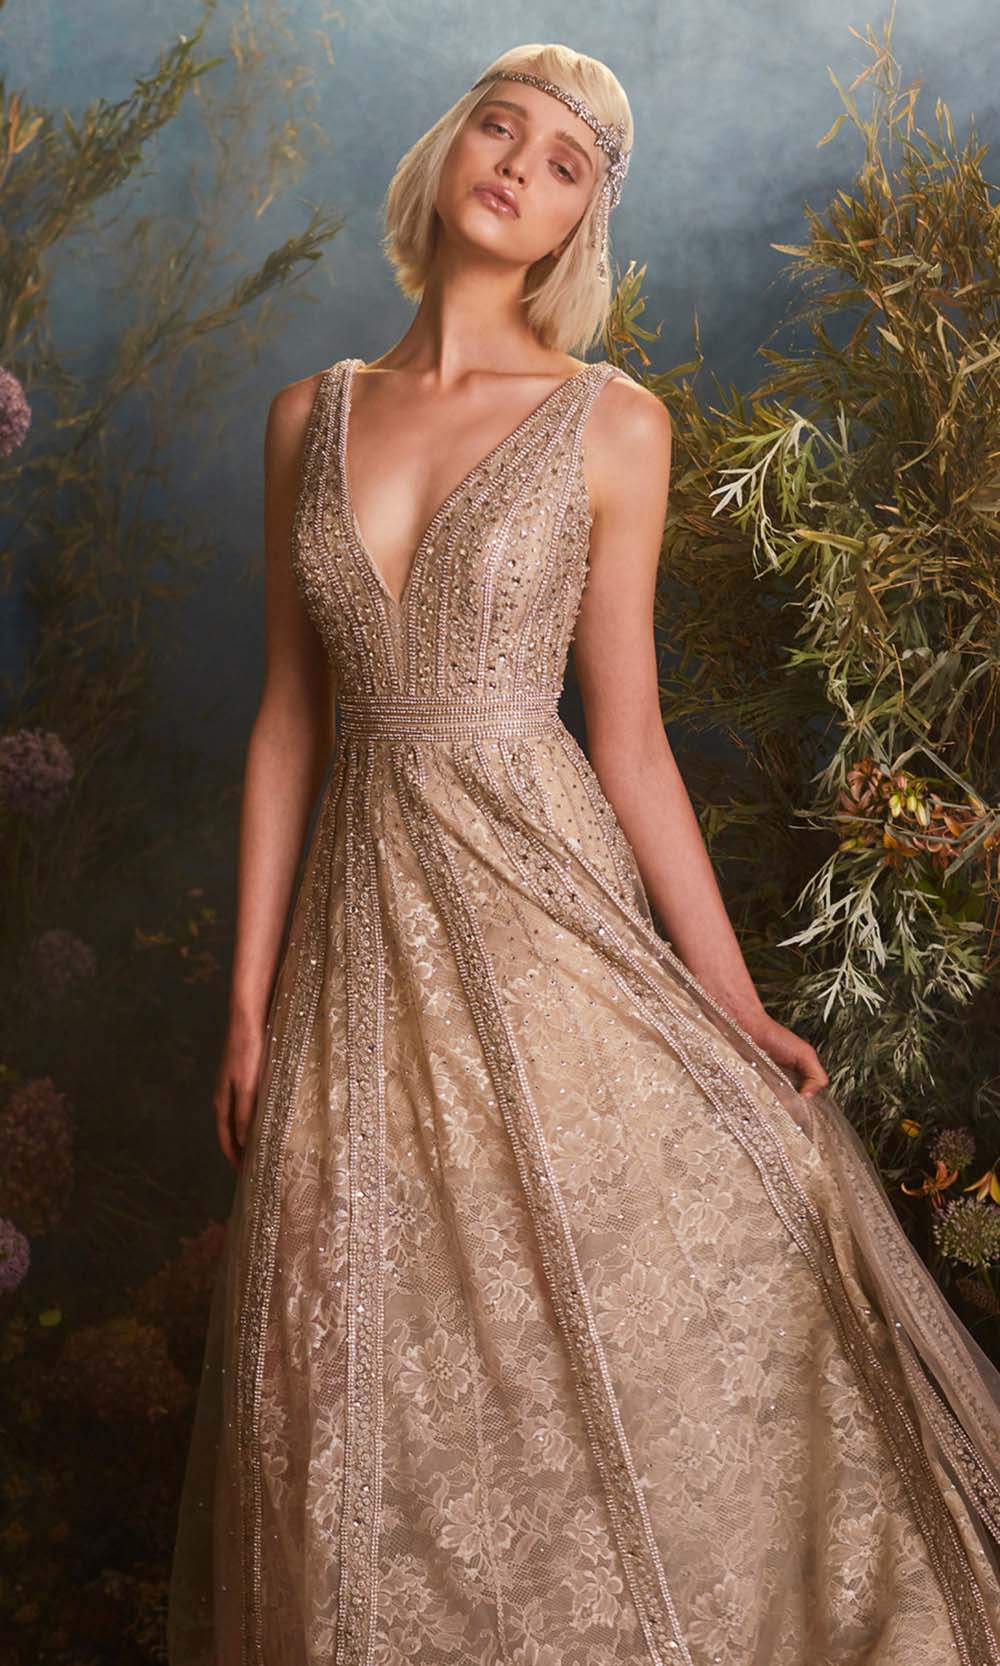 Andrea and Leo - A0966 Crystal Embellished Lace Dress In Champange and Gold